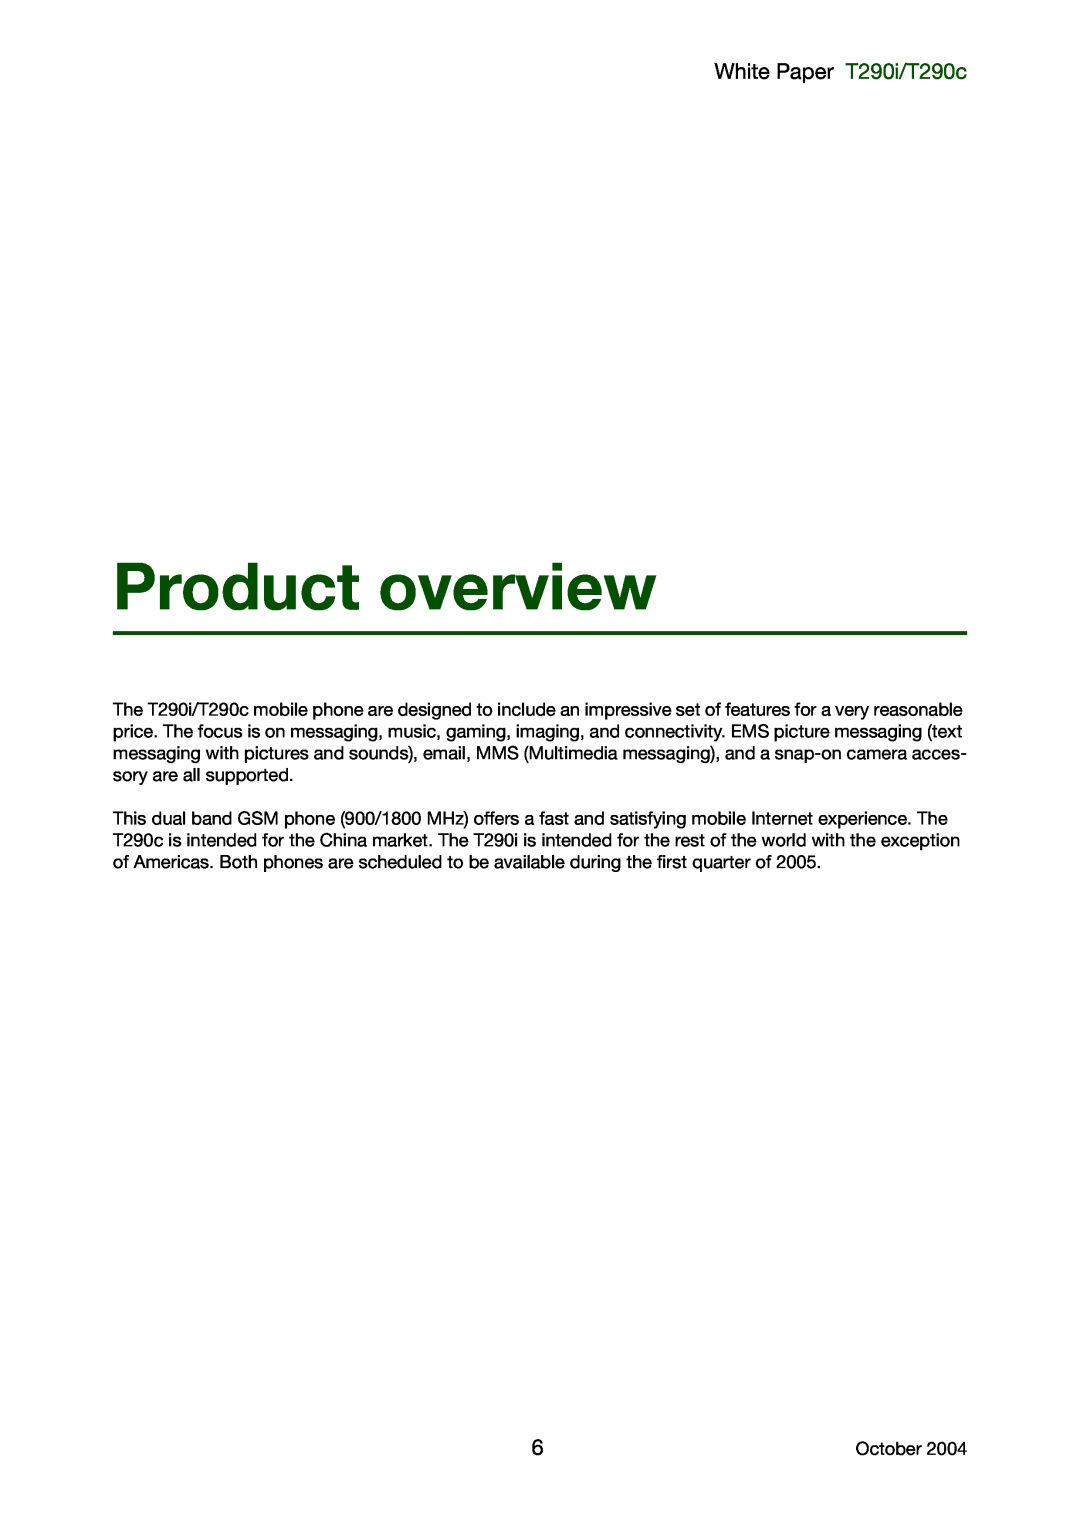 Sony Ericsson manual Product overview, White Paper T290i/T290c 